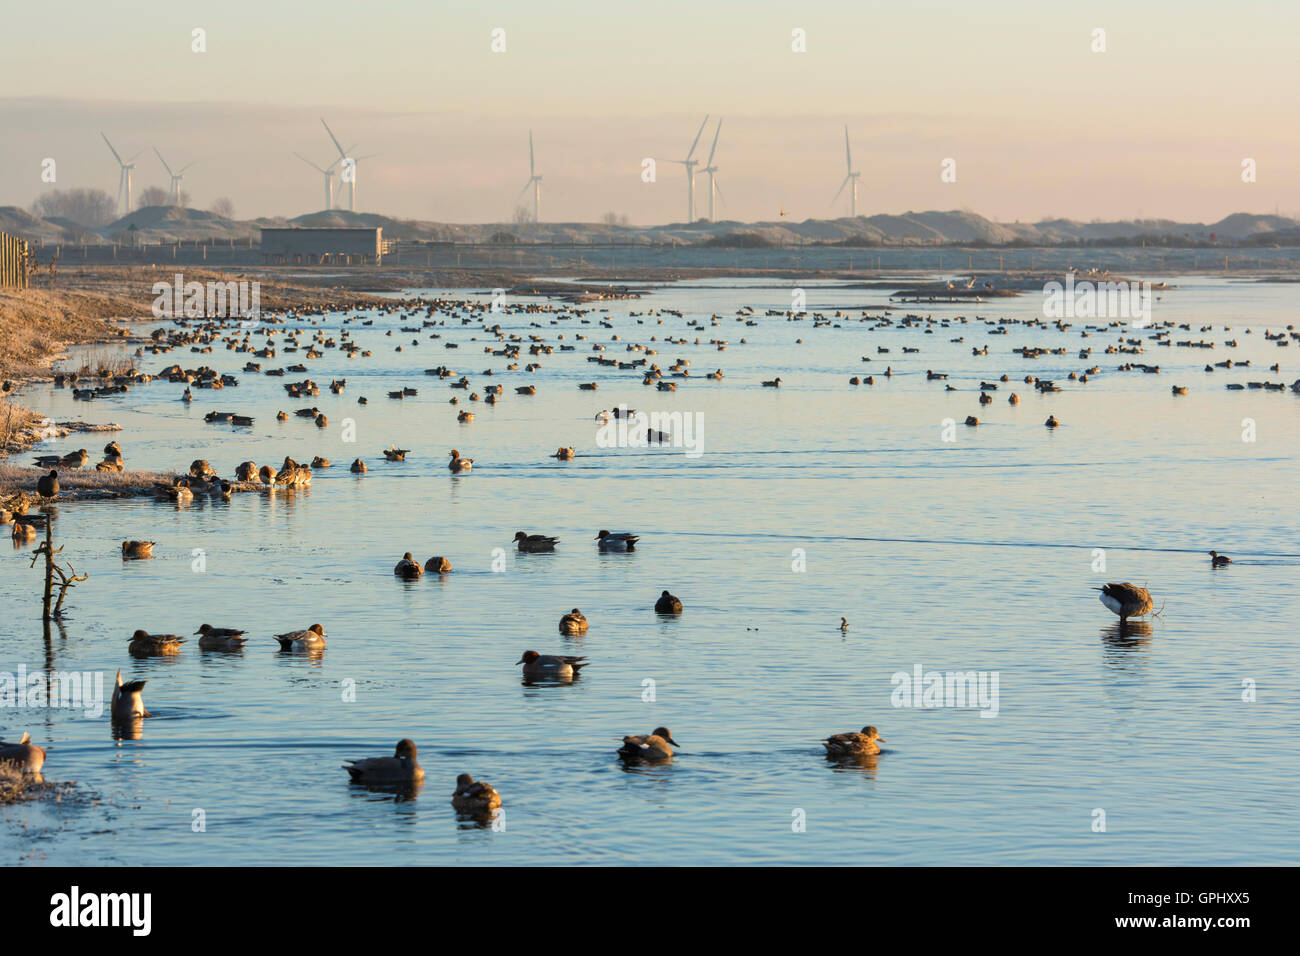 Large numbers of wildfowl on open water during winter, Rye Harbour Nature reserve, East Sussex, UK Stock Photo